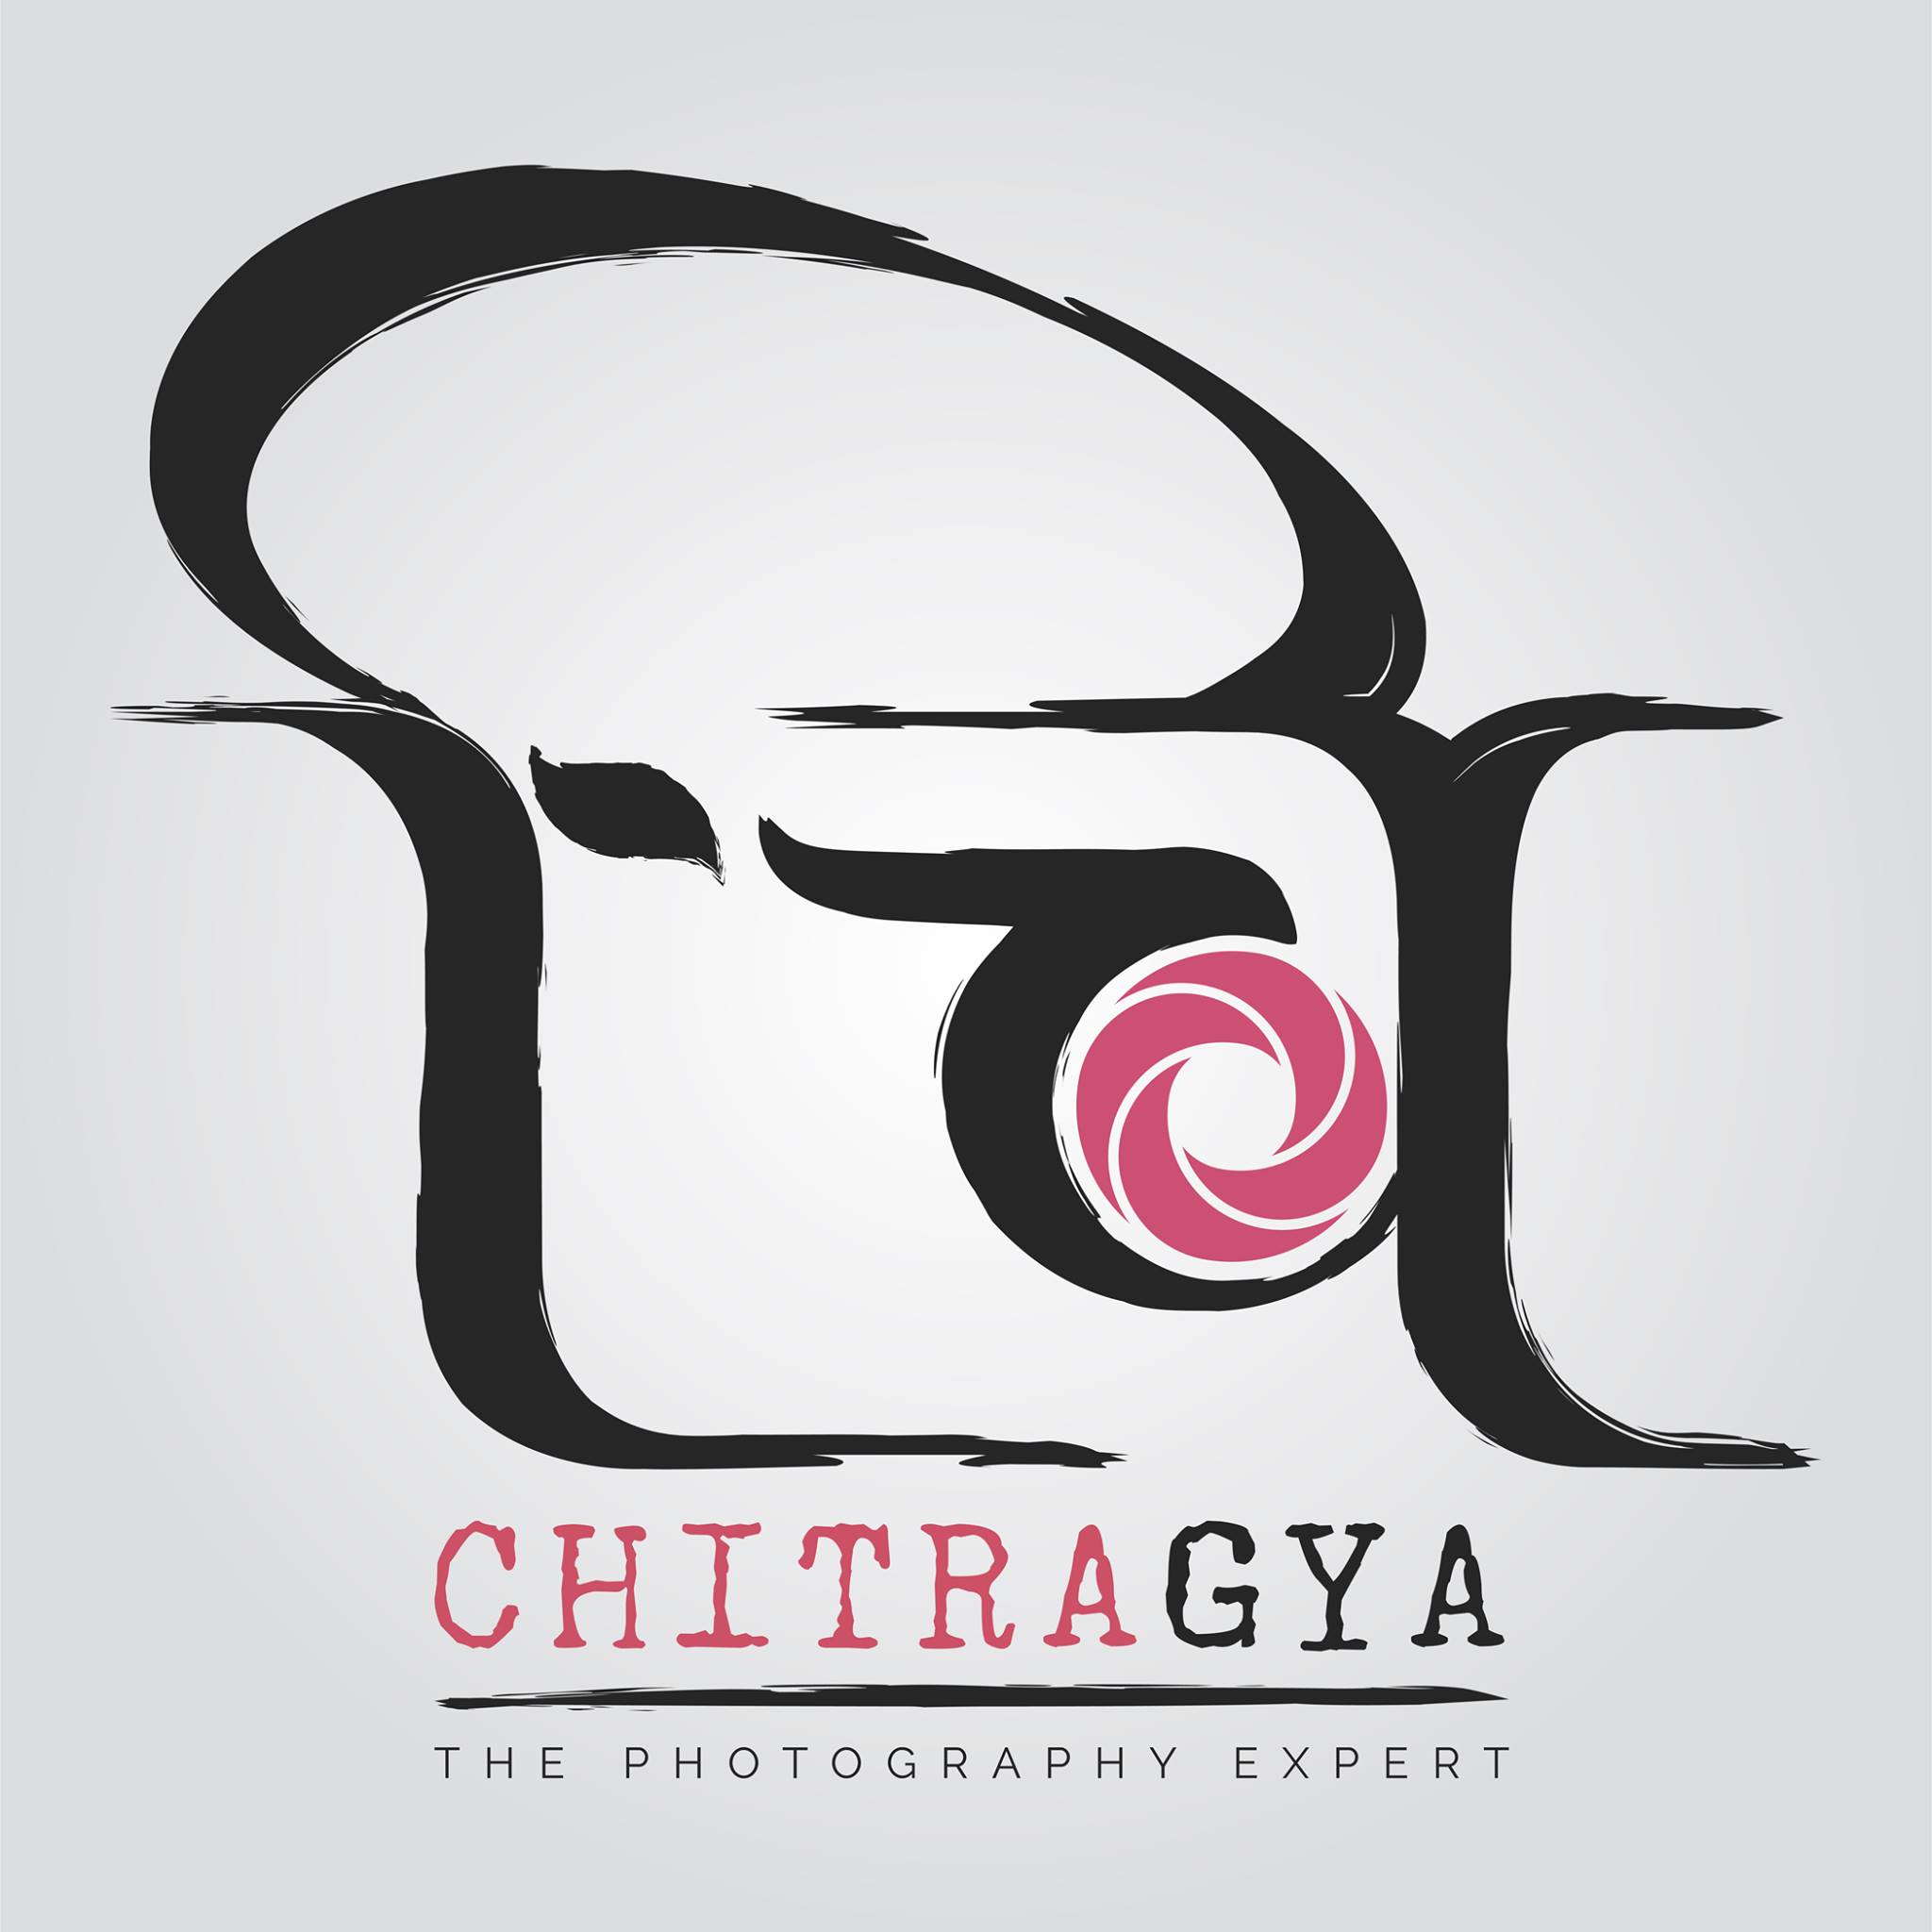 Chitragya - The Photography Expert|Catering Services|Event Services